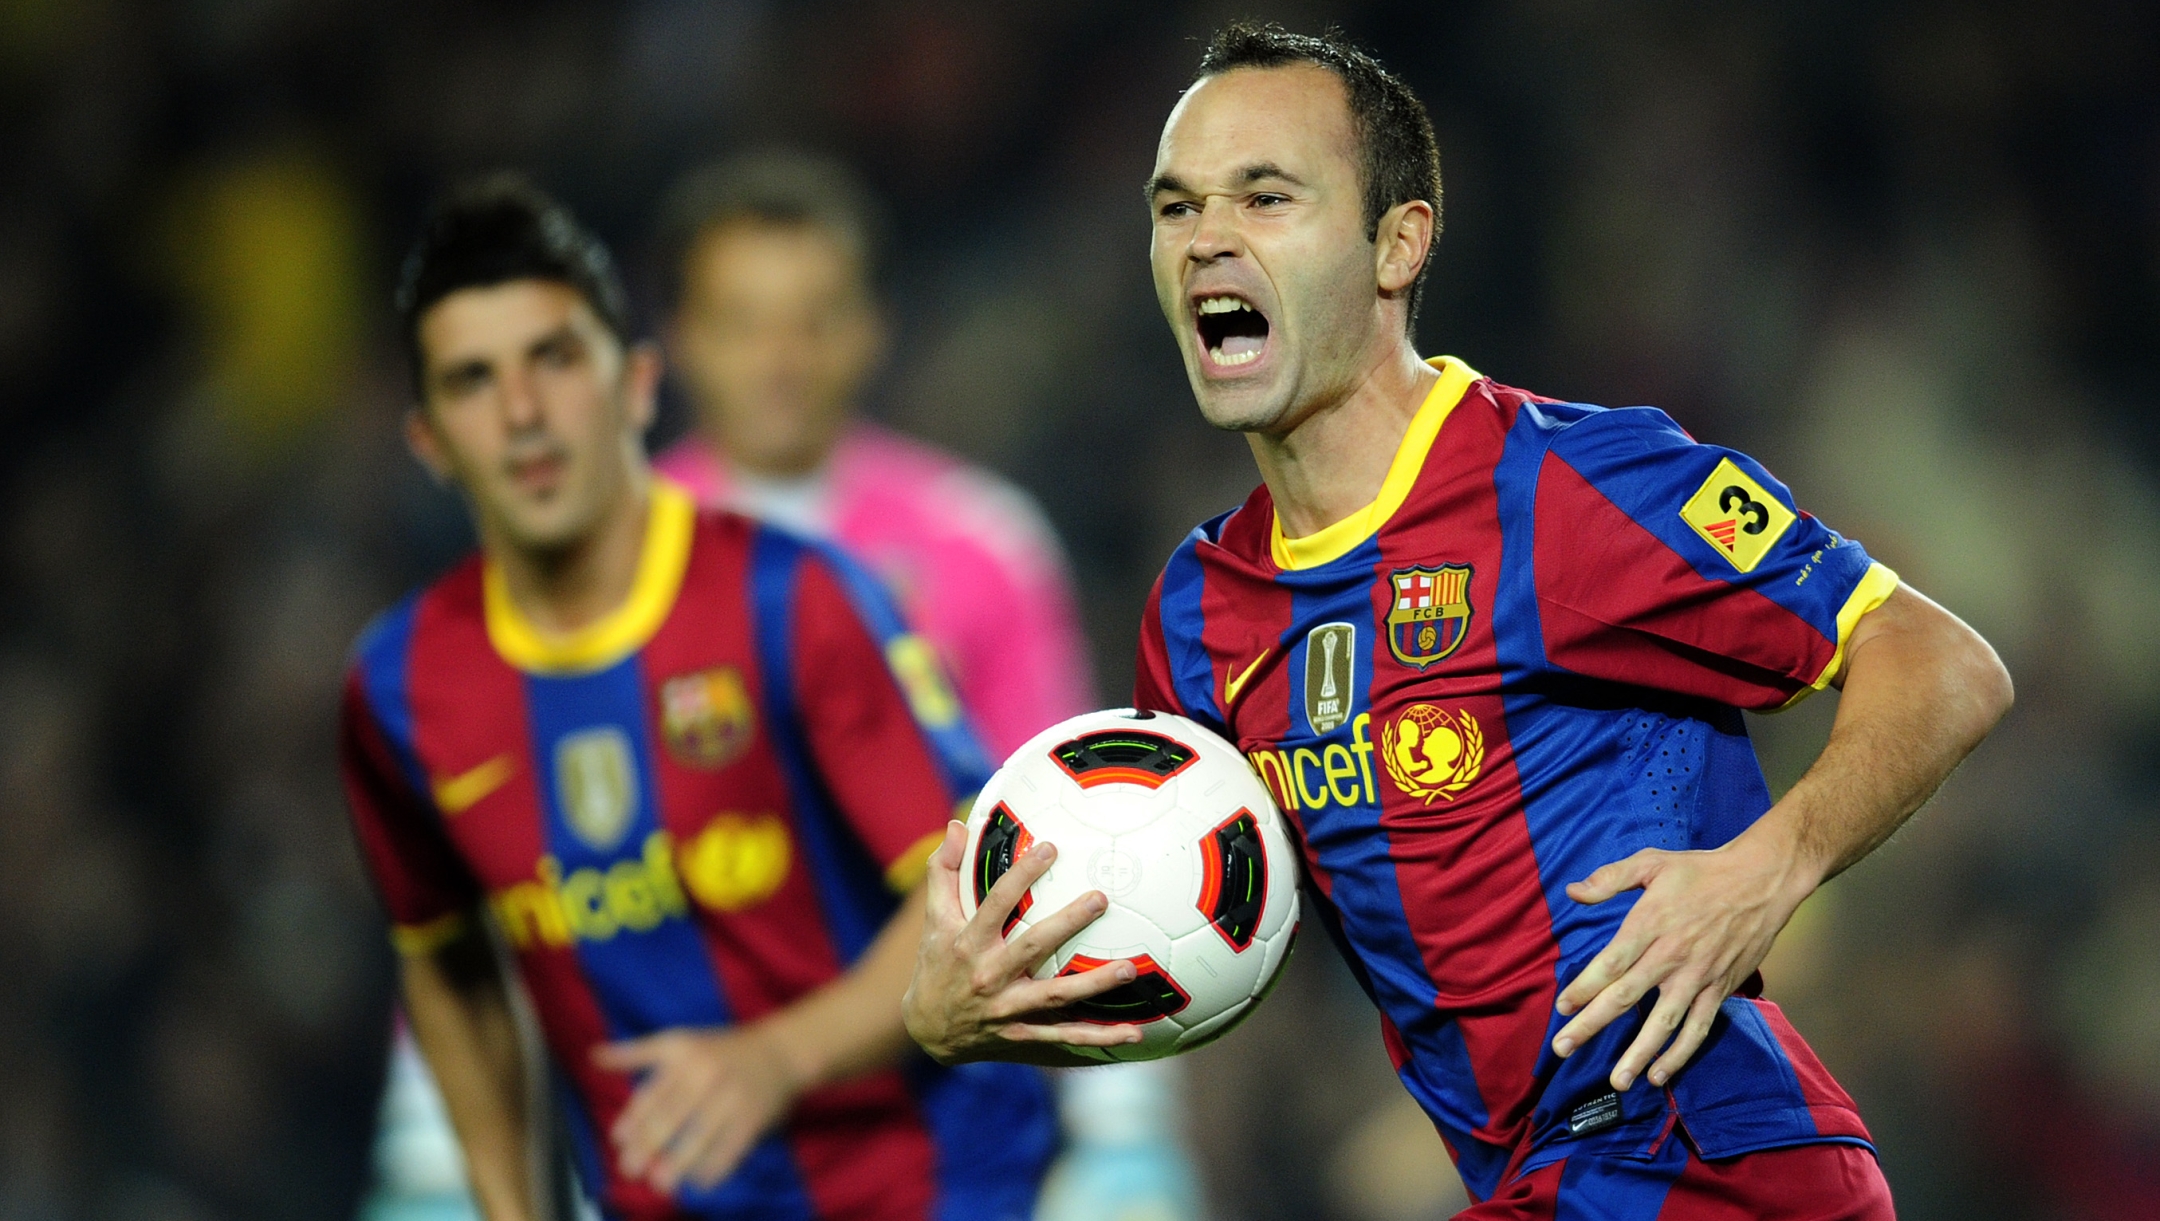 FC Barcelona's Andres Iniesta reacts after scoring against Valencia during a Spanish La Liga soccer match at the Camp Nou stadium in Barcelona, Spain, Saturday, Oct. 16, 2010. (AP Photo/Manu Fernandez)